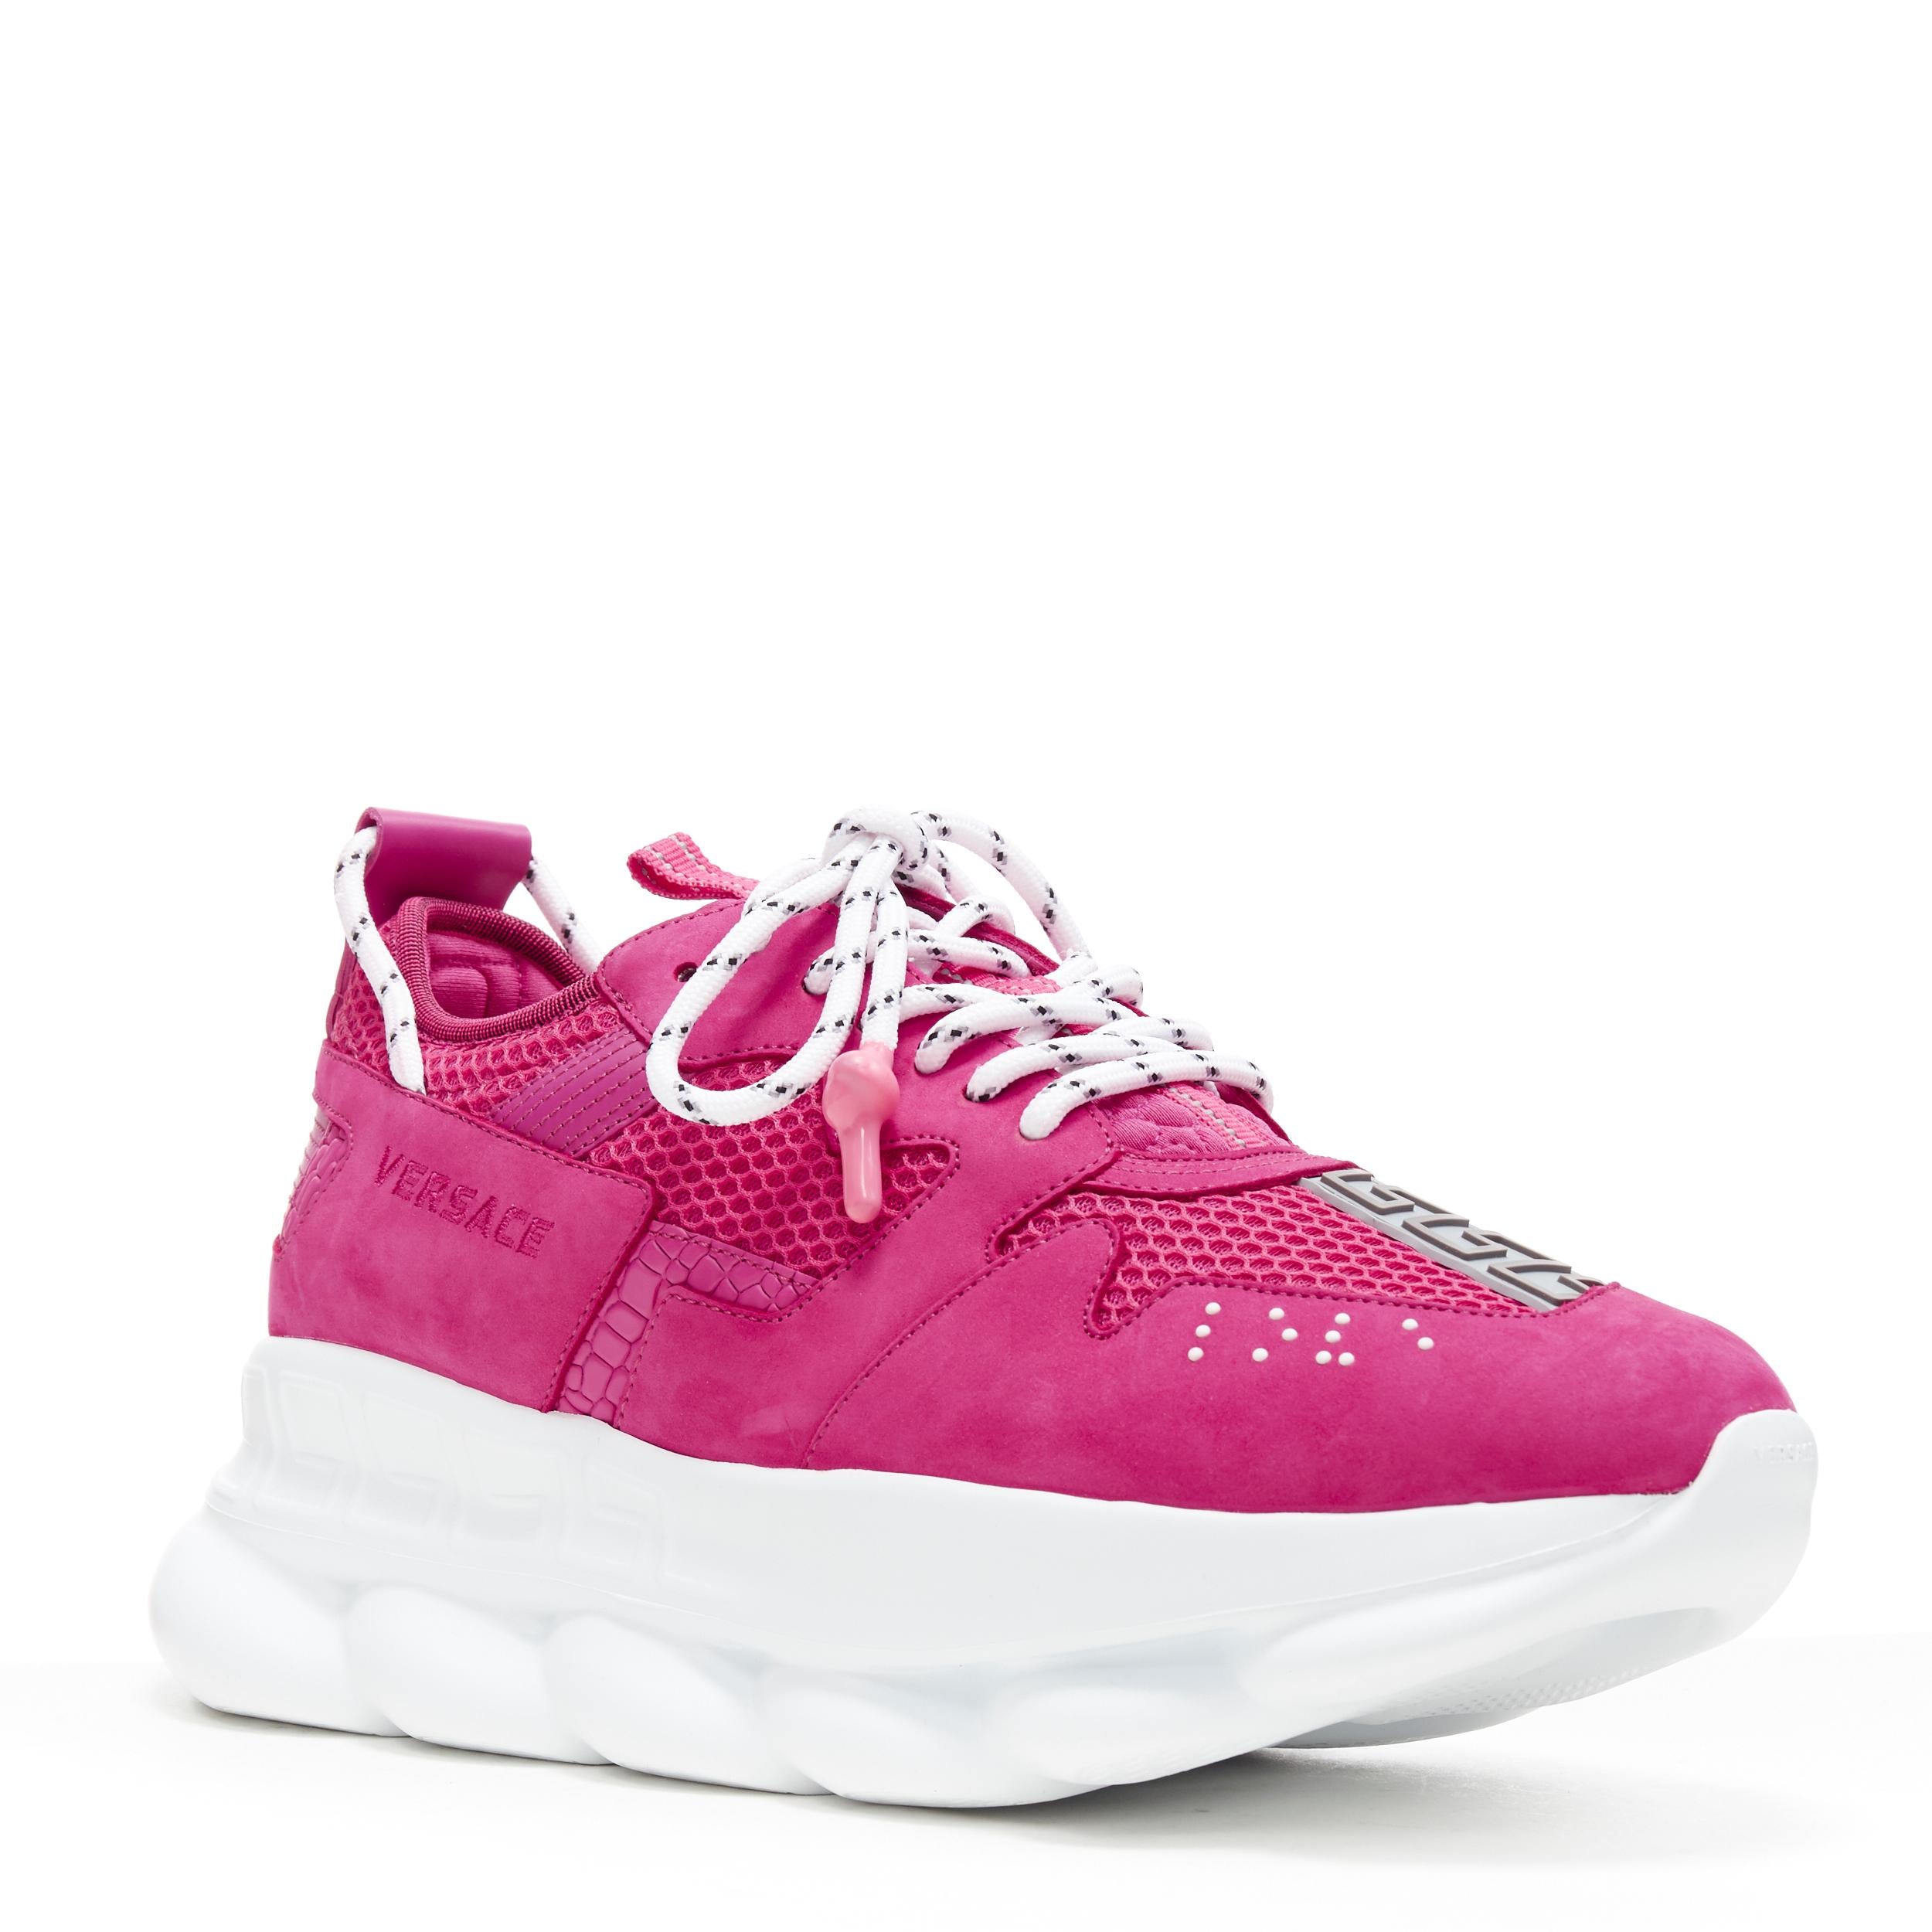 new VERSACE Chain Reaction Blowzy pink suede low top chunky sneaker US10 EU43 
Reference: TGAS/C00966 
Brand: Versace 
Designer: Salehe Bembery 
Model: Chain Reaction 
Material: Leather 
Color: Pink 
Pattern: Solid 
Closure: Lace 
Extra Detail: